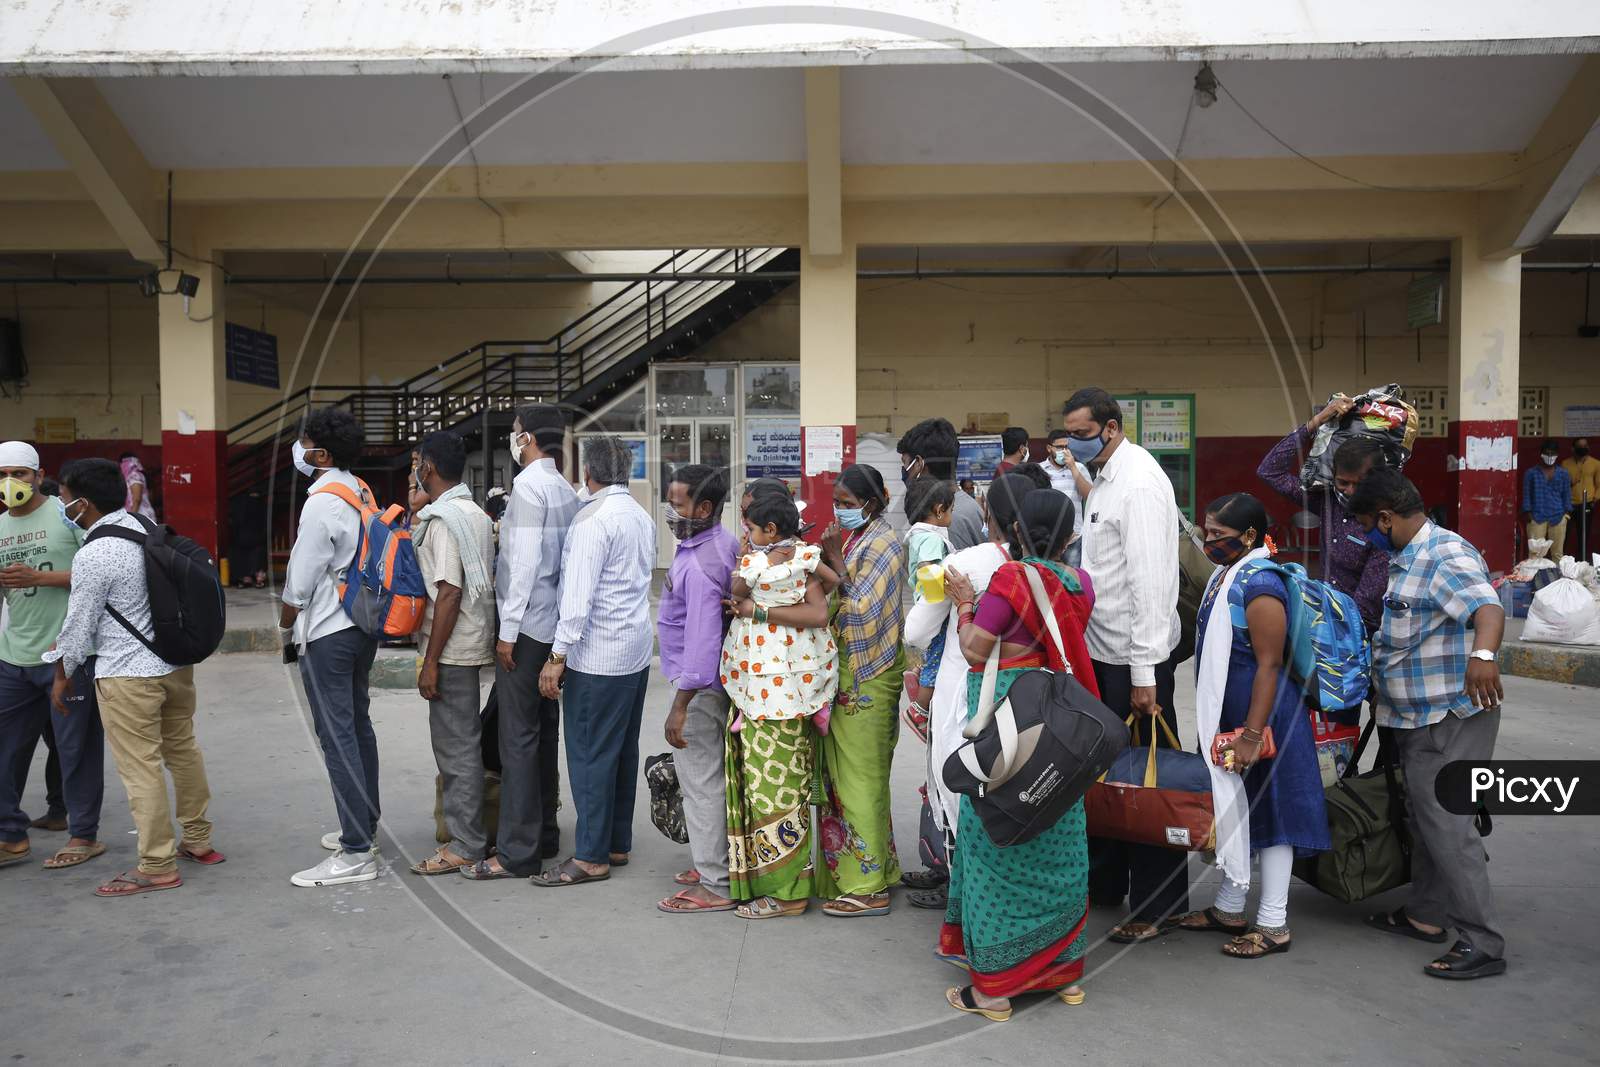 People wait in queue to board a public transport bus after the state eased lockdown norms during the nationwide lockdown to prevent the spread of coronavirus (COVID-19) in Bangalore, India.